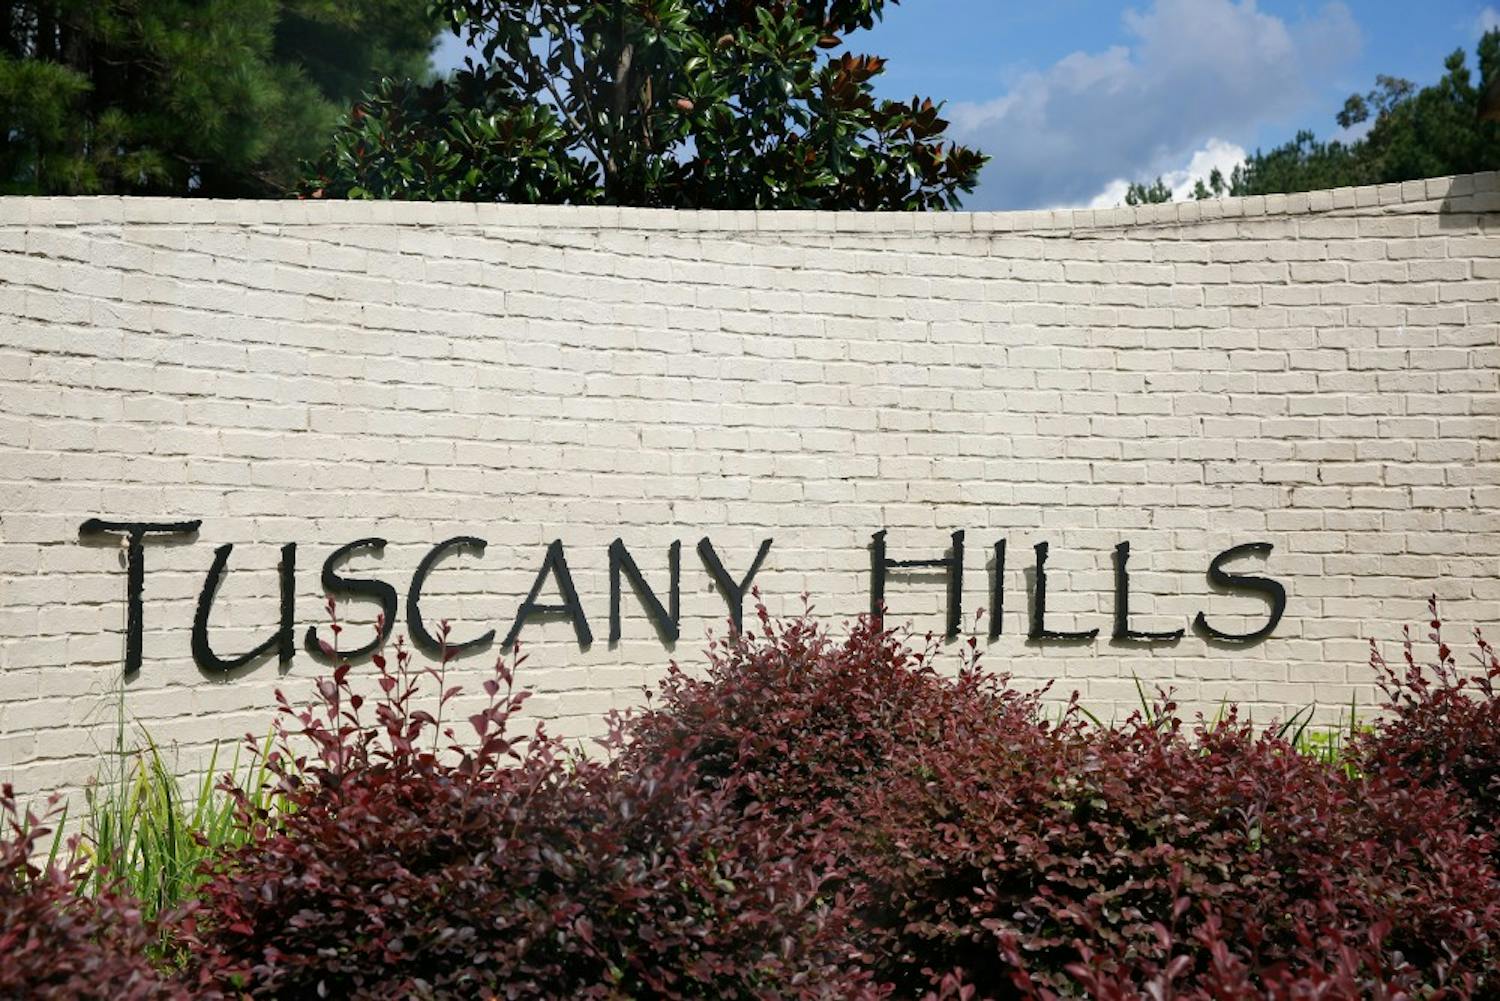 Tuscany Hills, one of the neighborhoods set to receive internet from Charter, on Friday, Aug. 19, 2016 in Auburn, Ala.